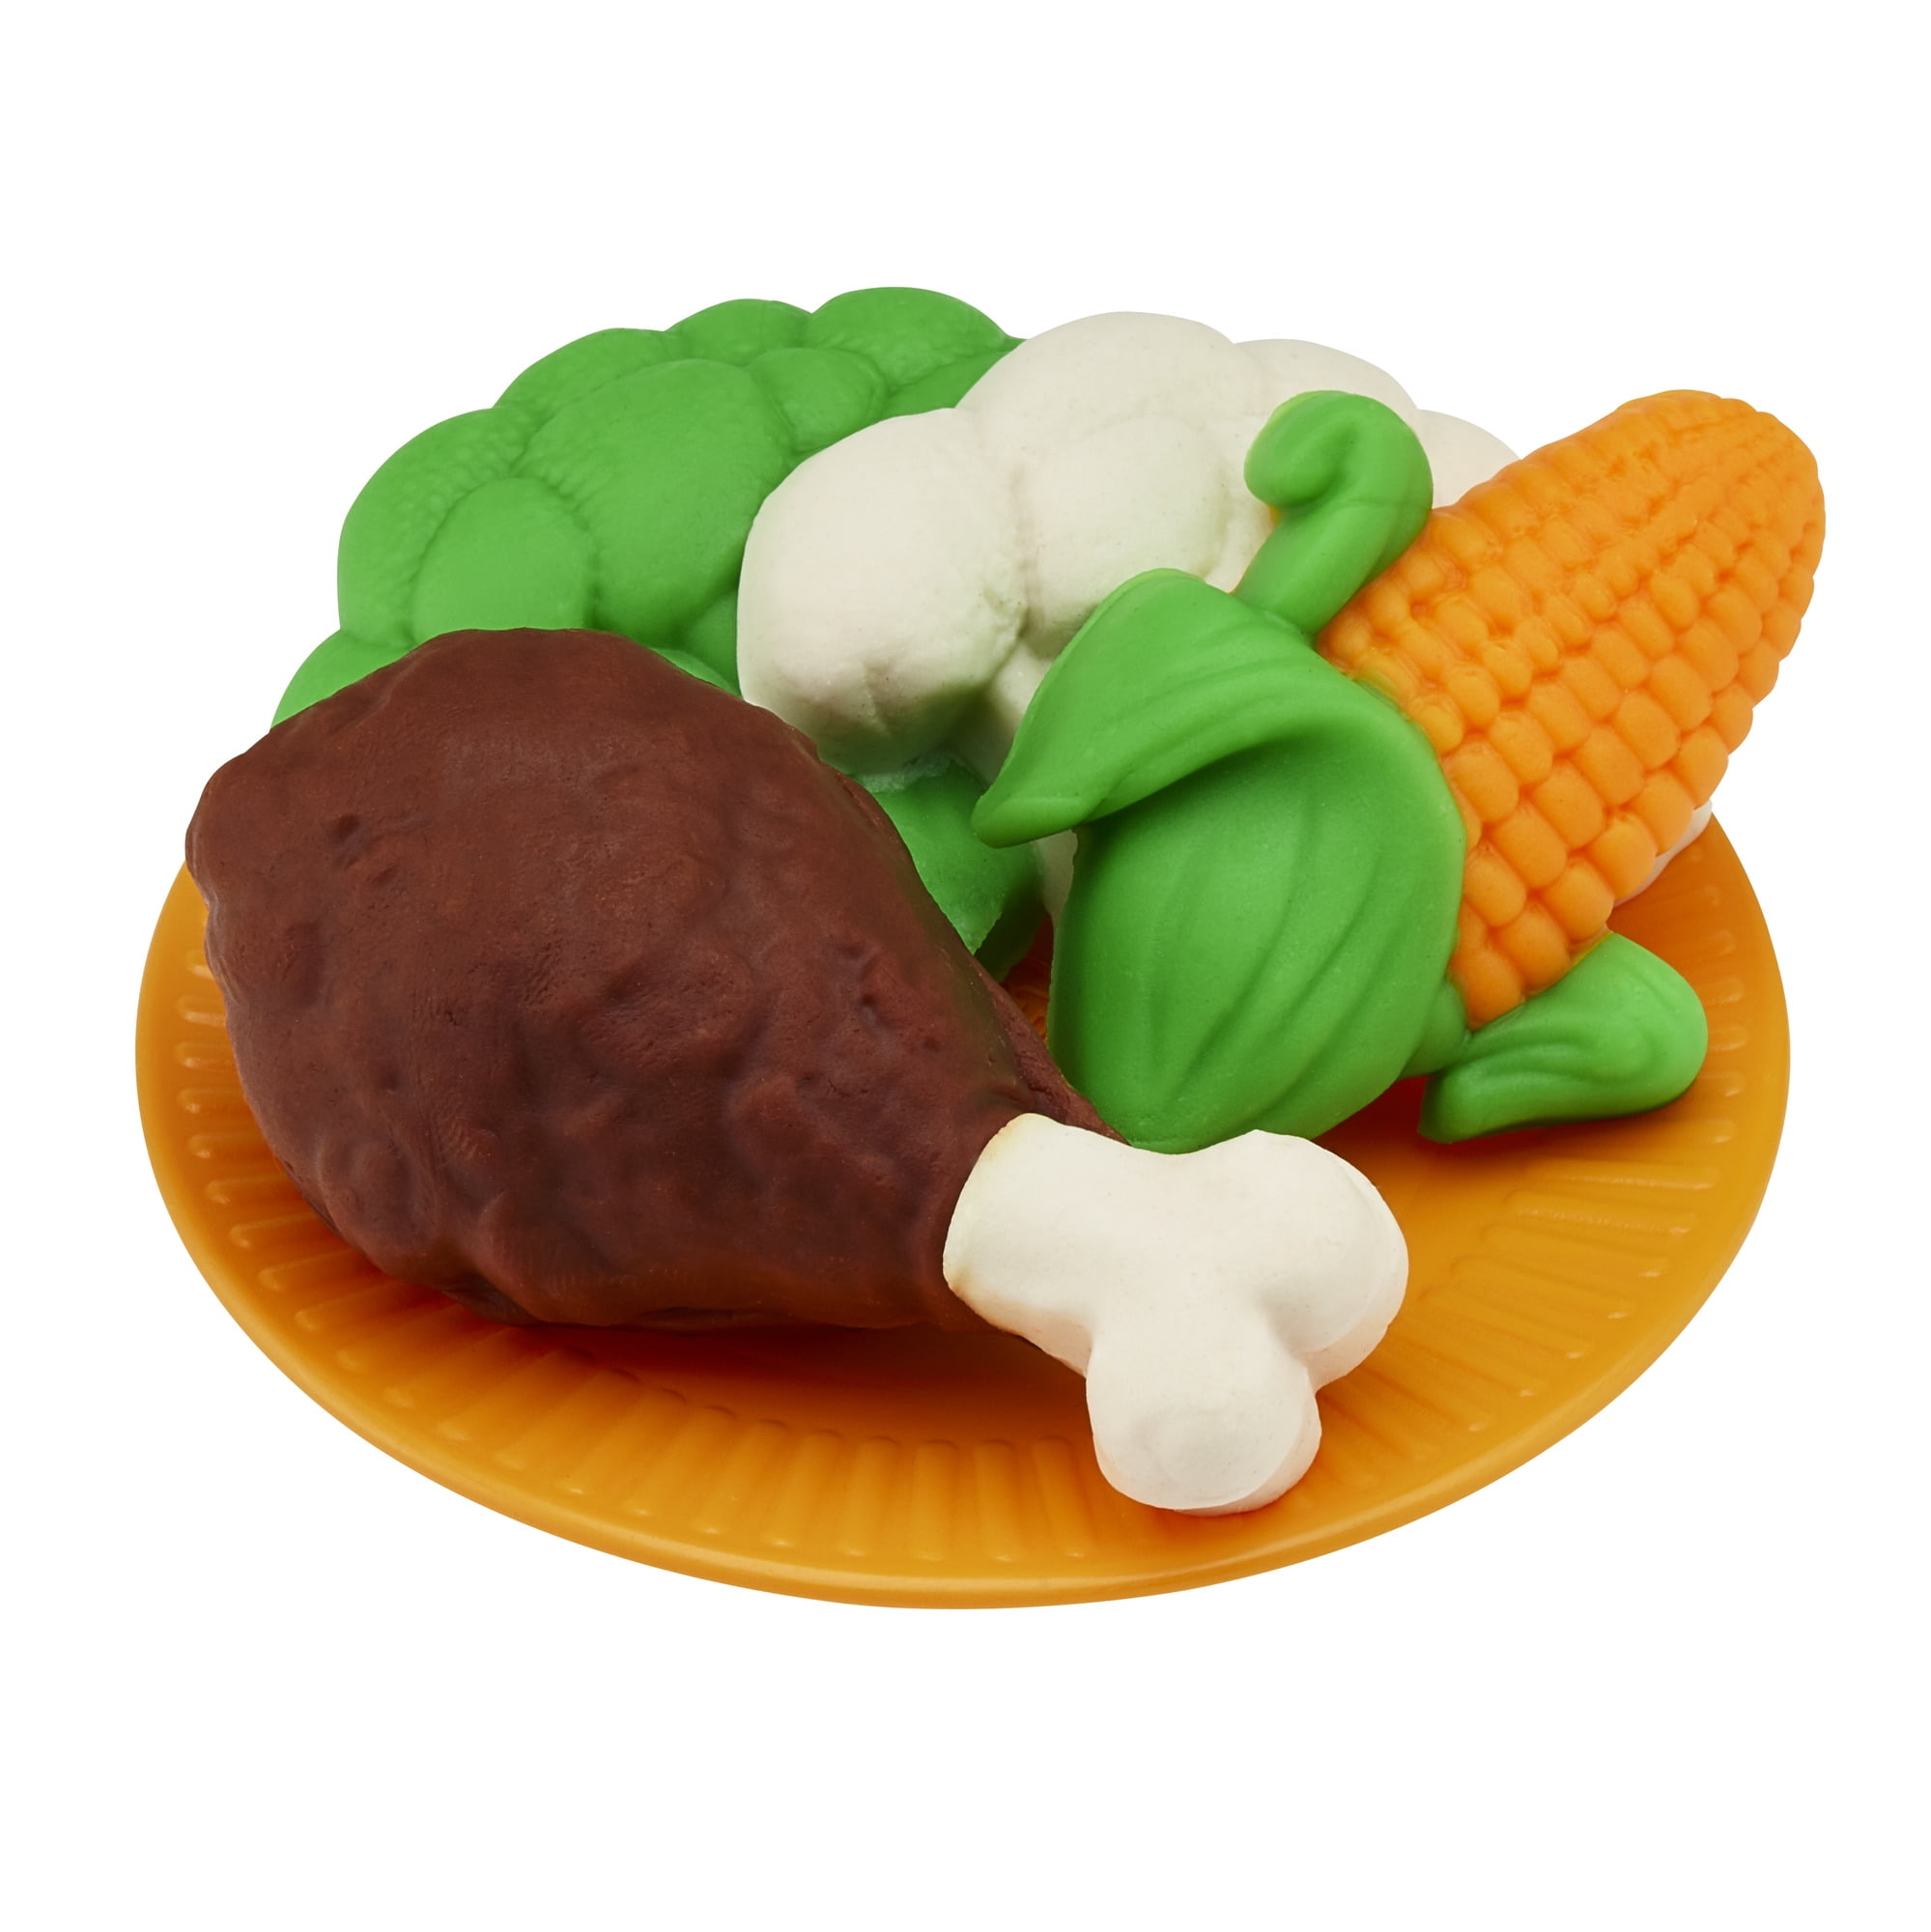 play doh grocery goodies